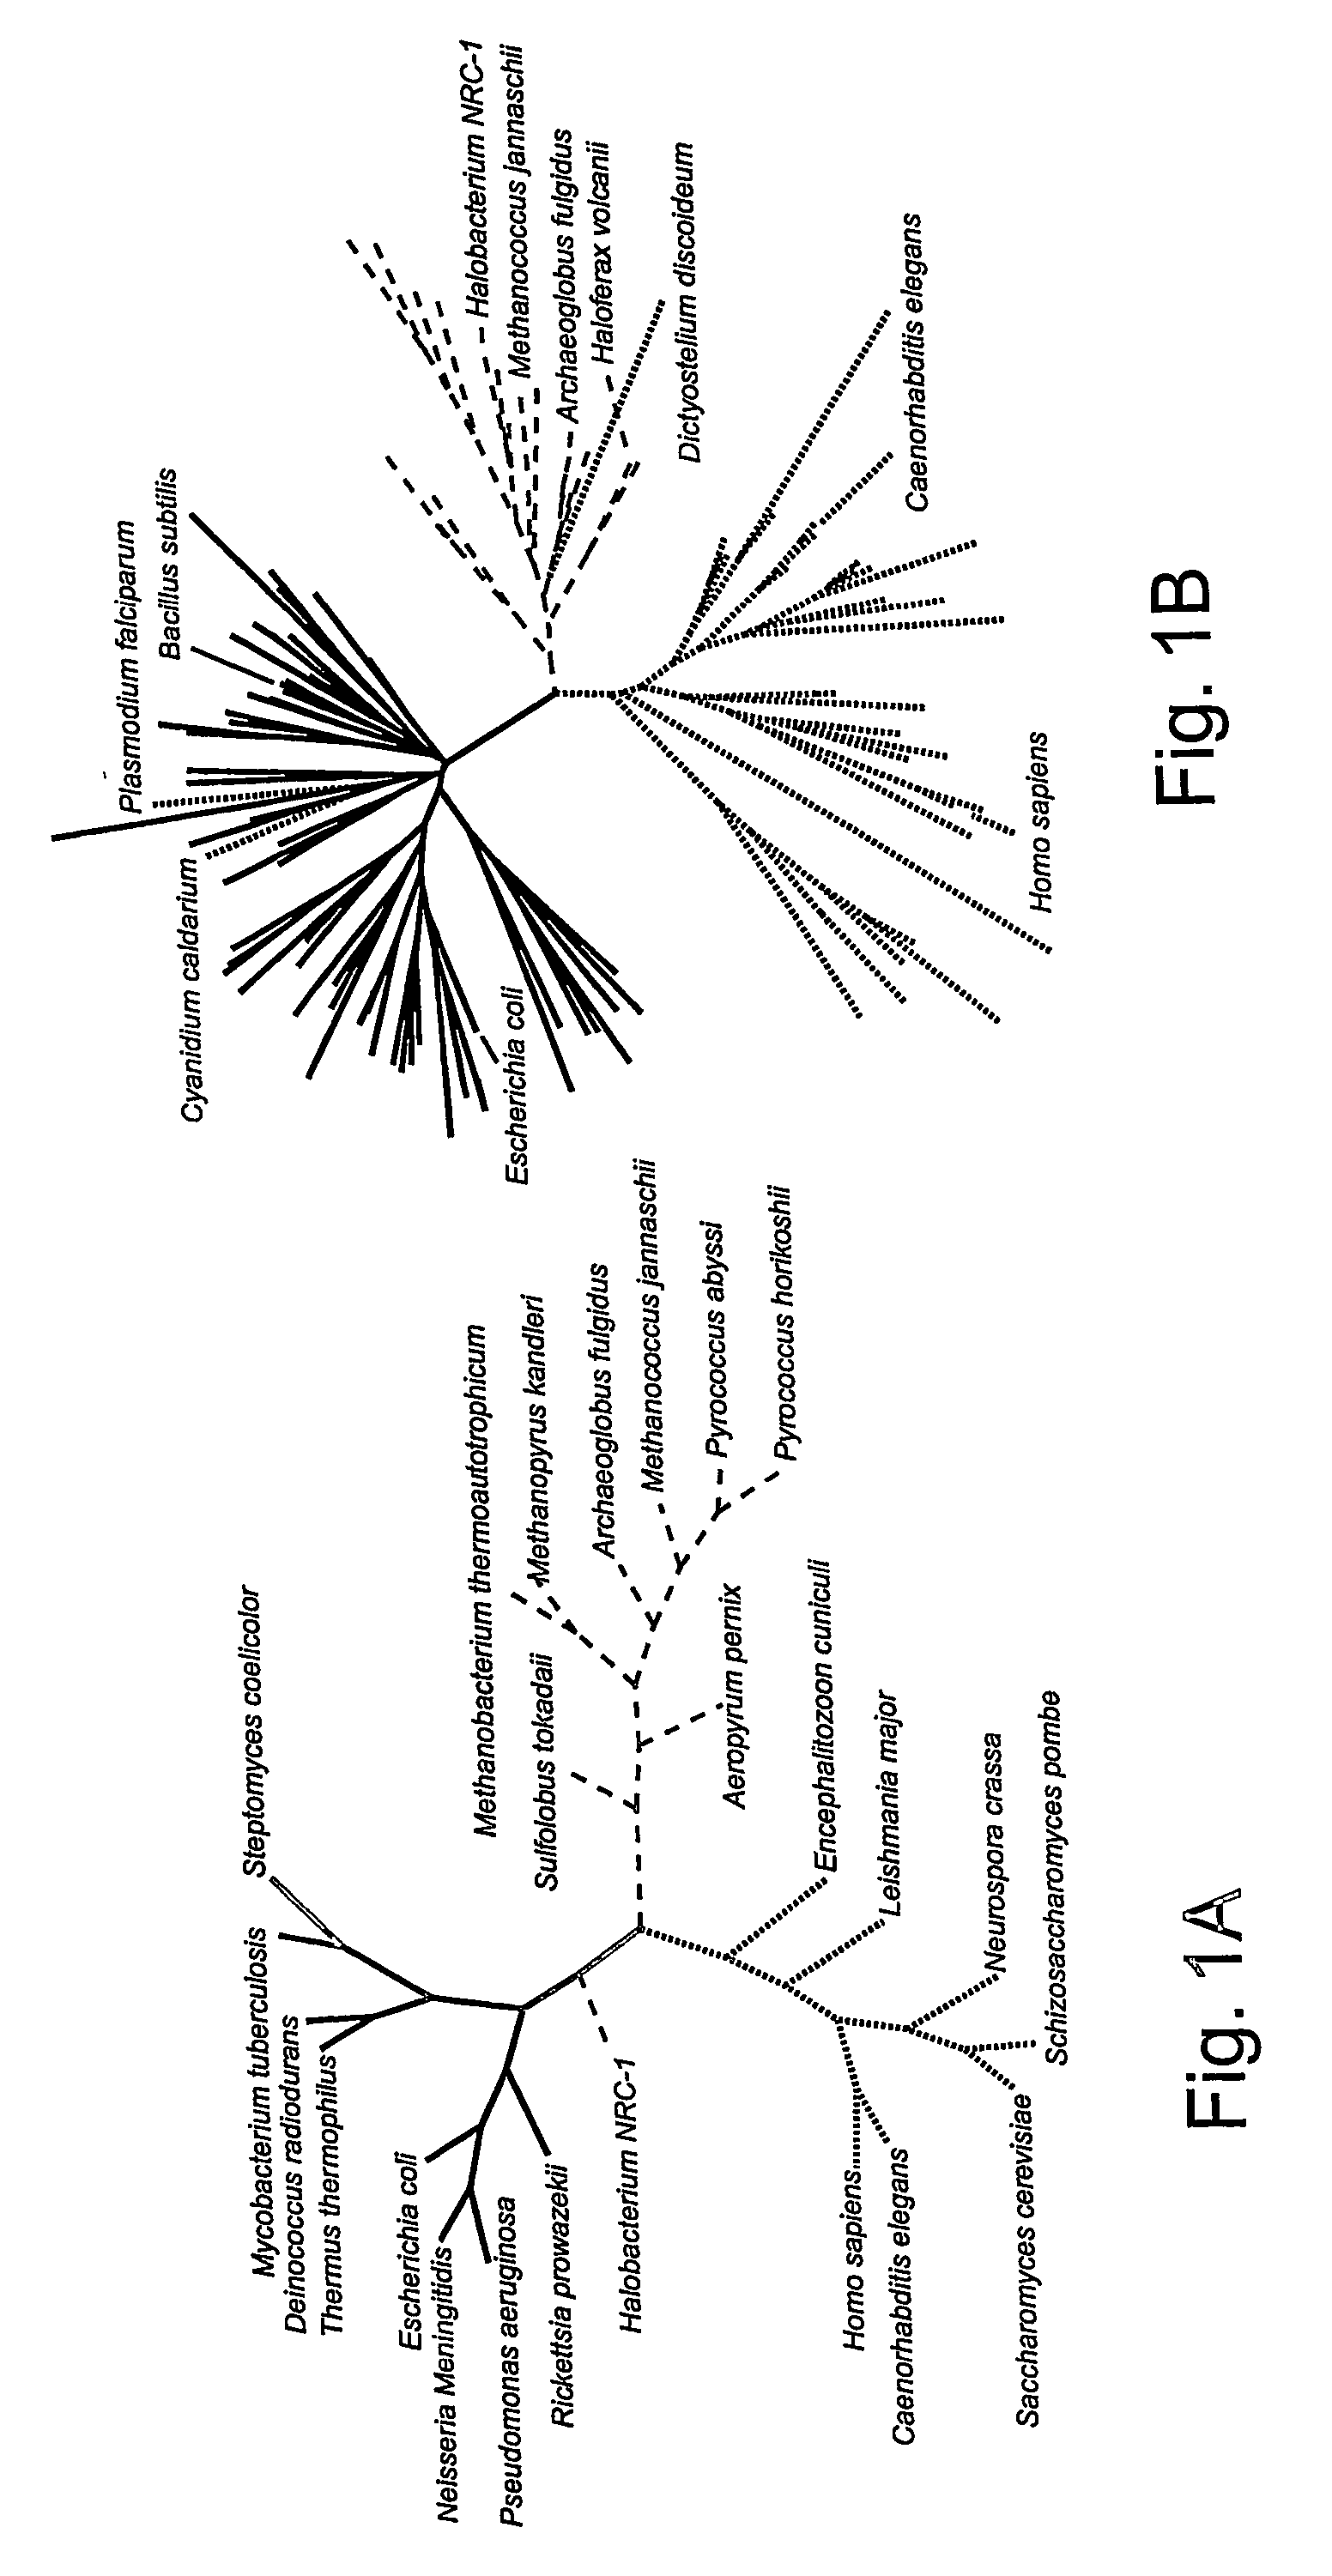 Compositions of orthogonal leucyl-trna and aminoacyl-trna synthetase pairs and uses thereof